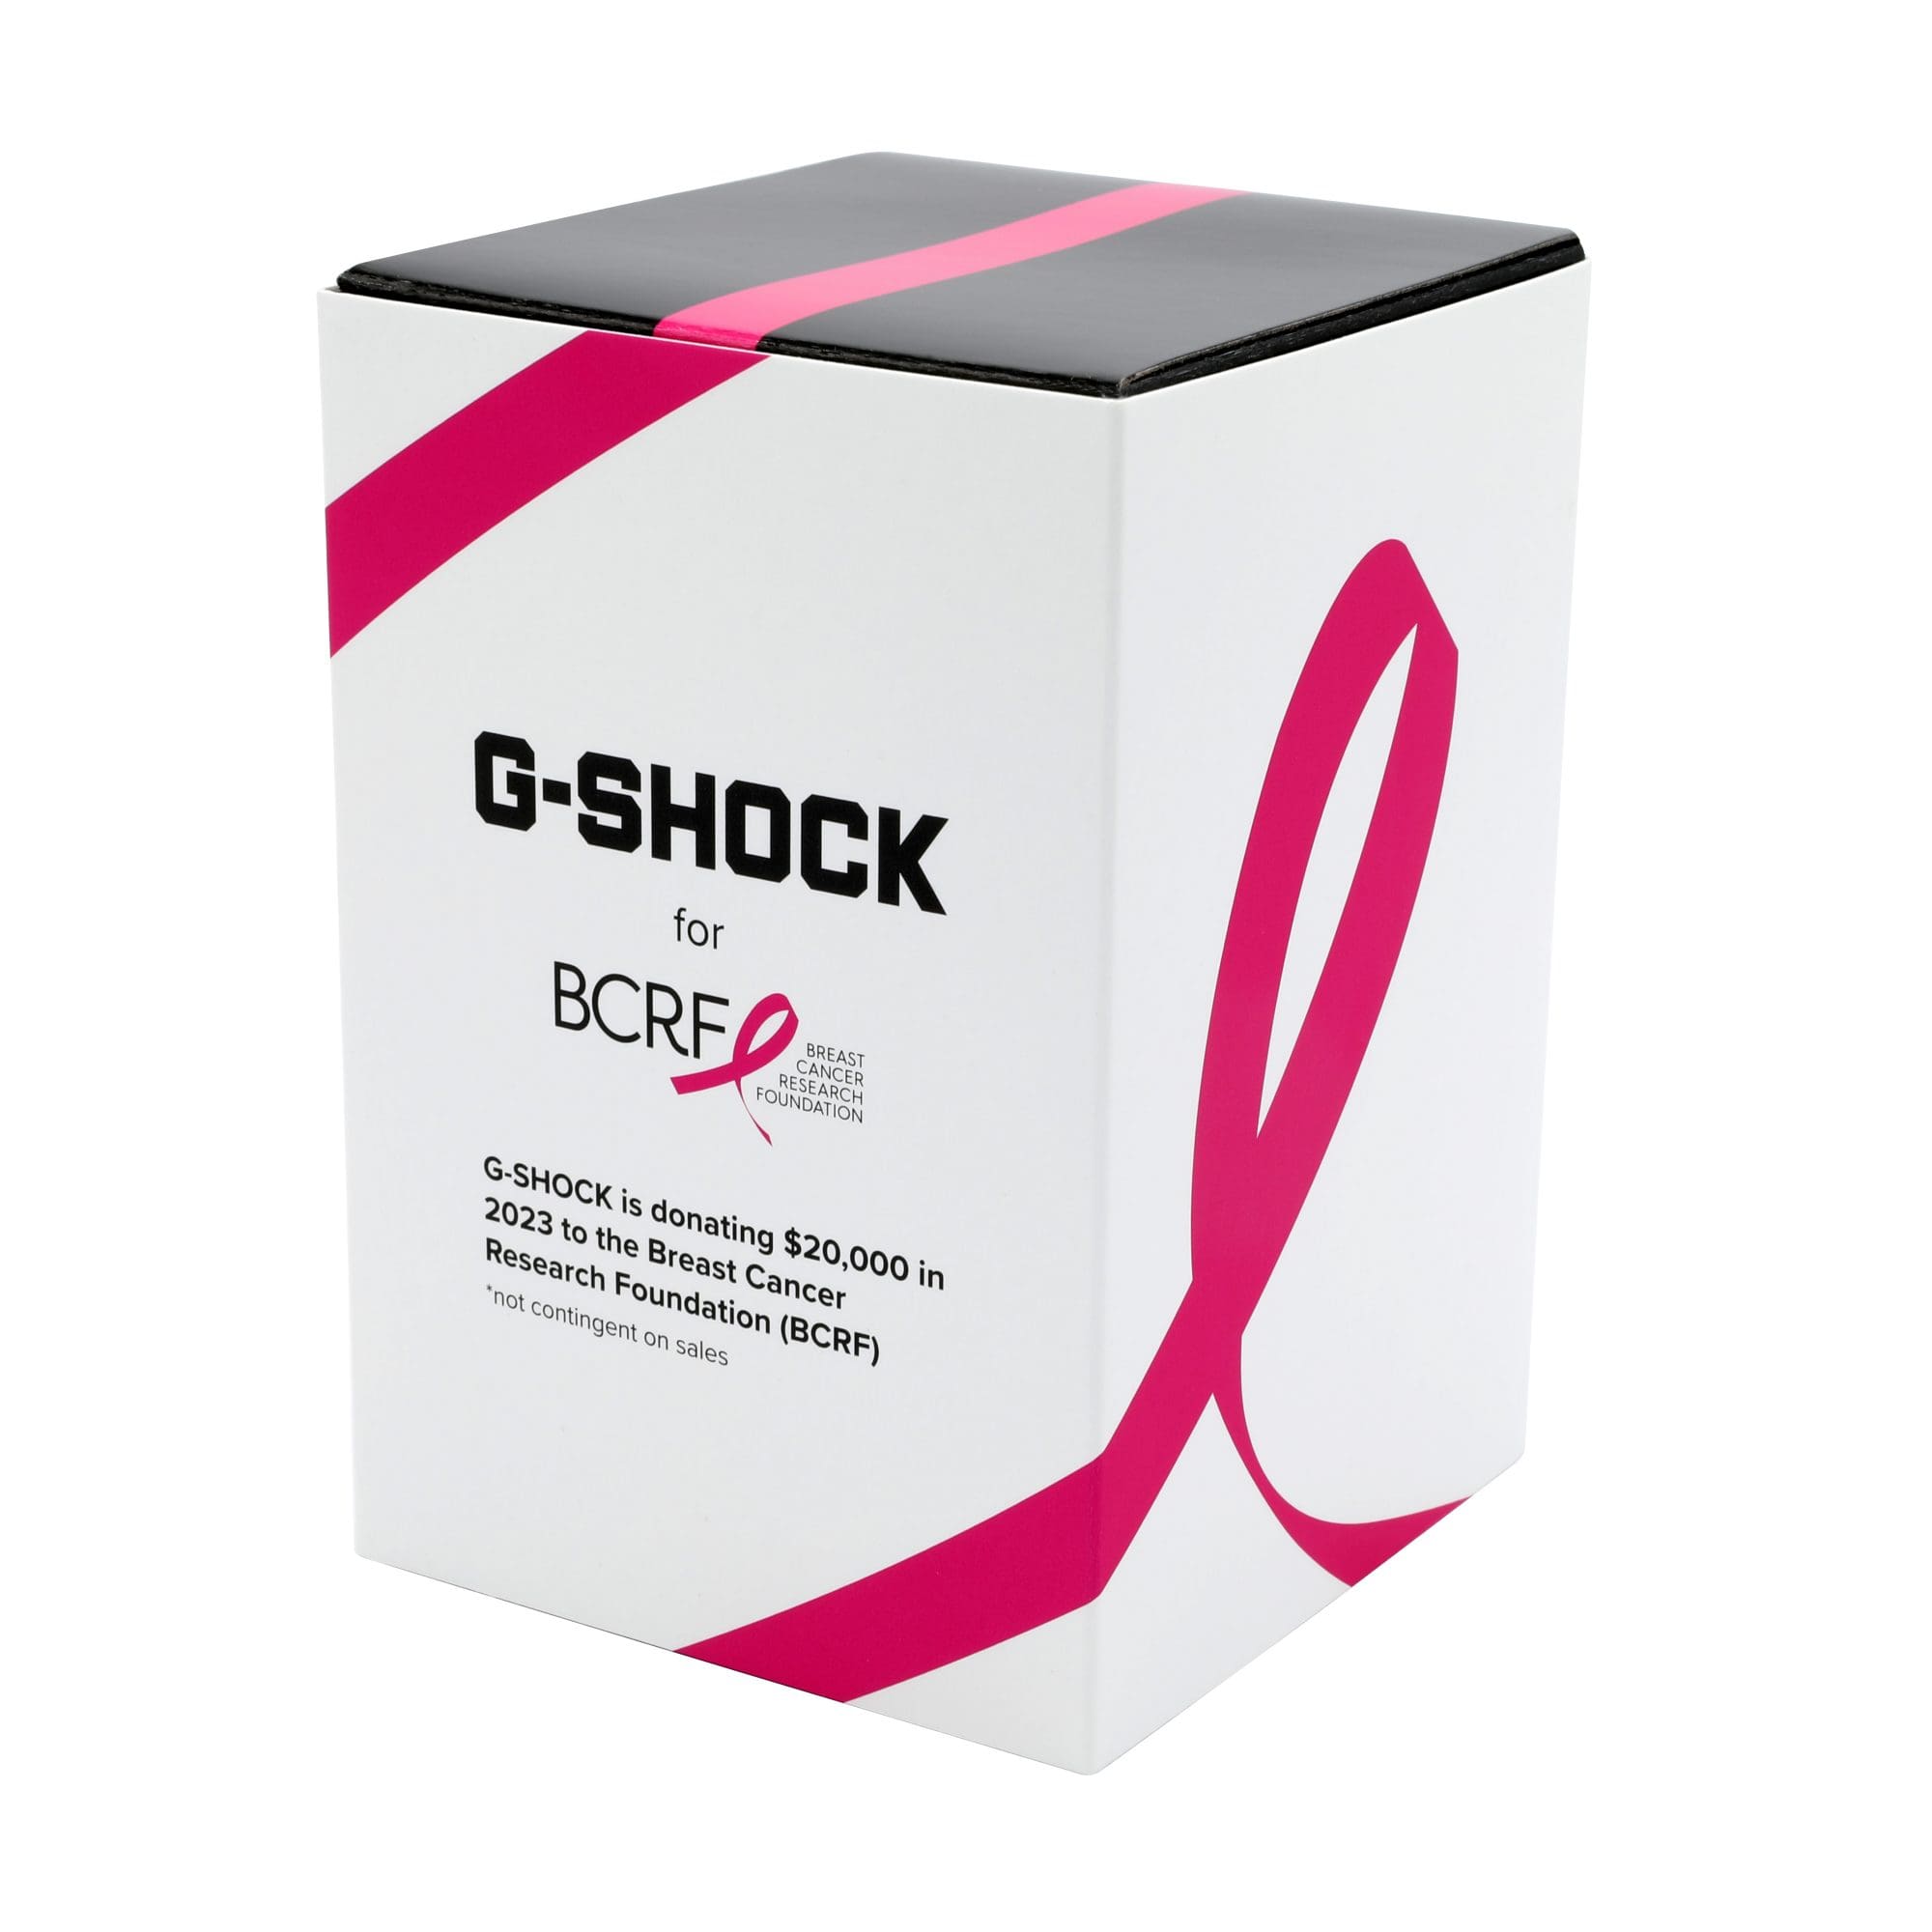 G-SHOCK X Breast Cancer Research Foundation Collaboration Model packaging